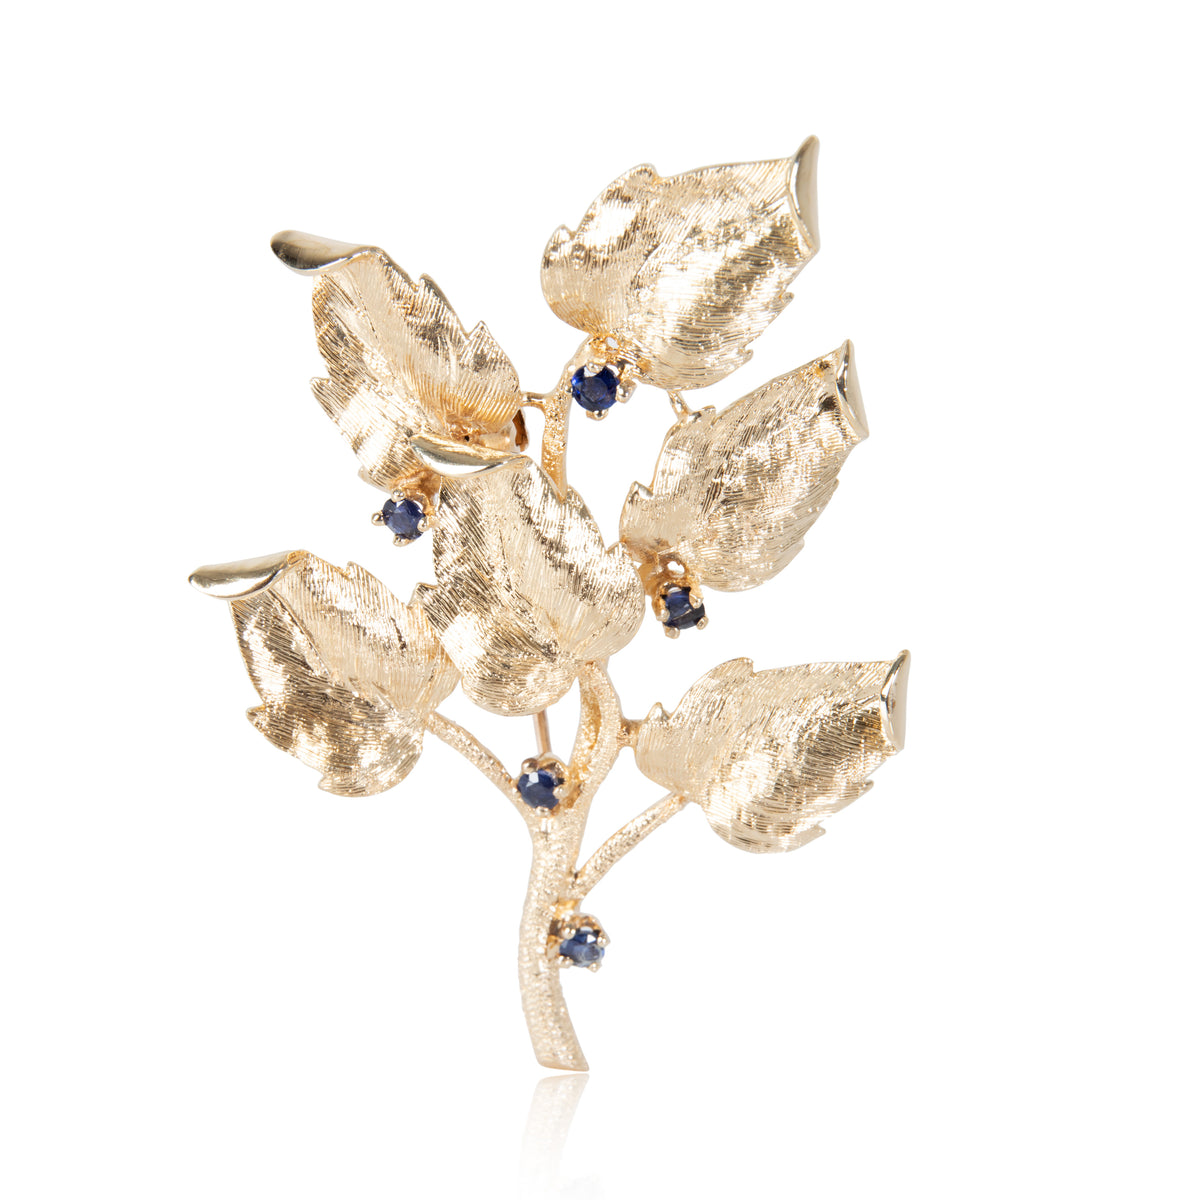 Vintage Sapphire Leaf Brooch in 14K Yellow Gold